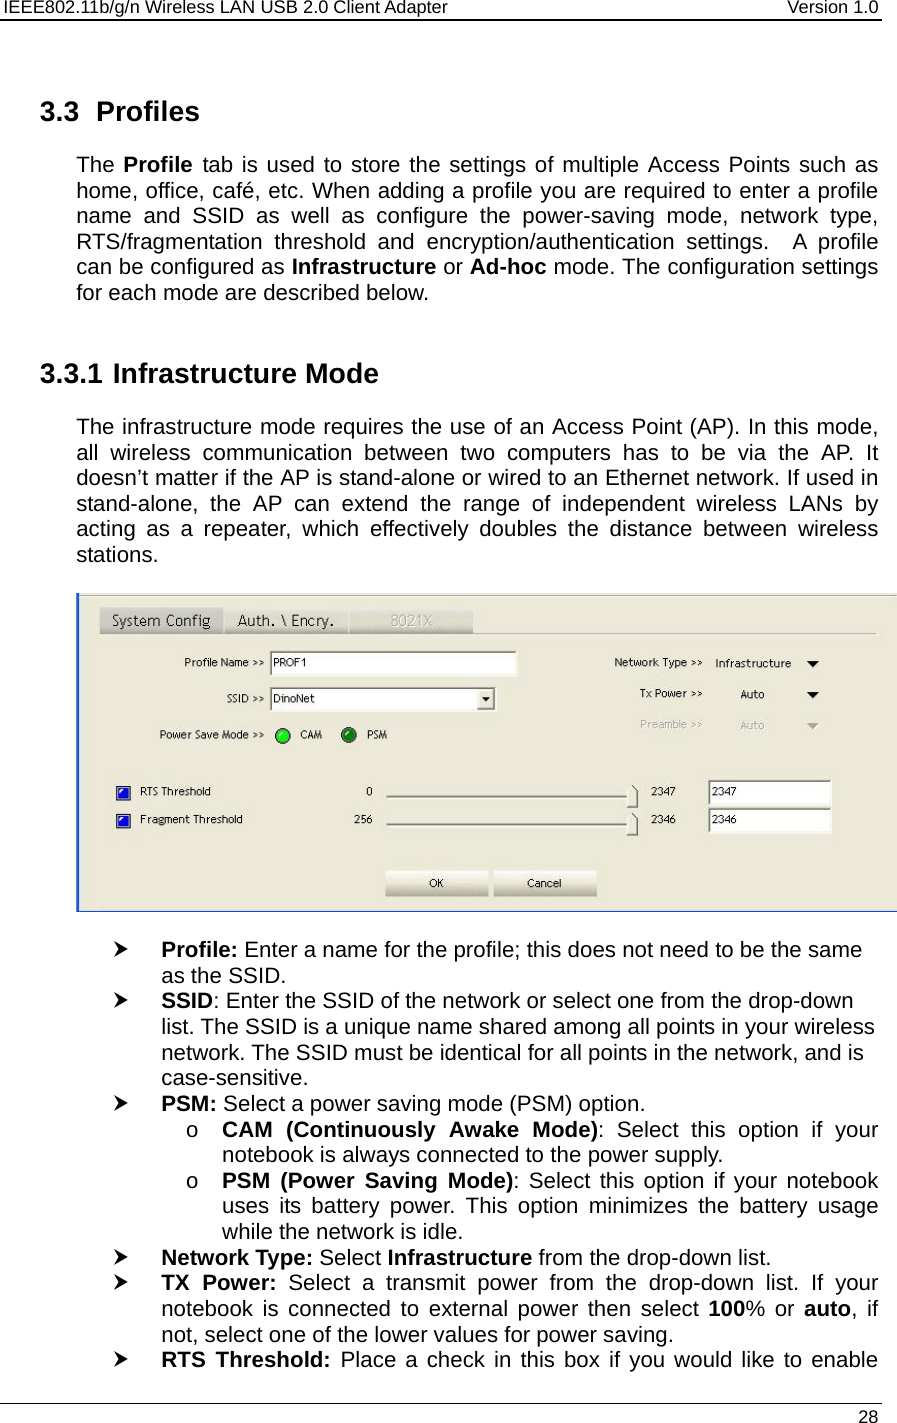 IEEE802.11b/g/n Wireless LAN USB 2.0 Client Adapter  Version 1.0   28   3.3 Profiles The Profile  tab is used to store the settings of multiple Access Points such as home, office, café, etc. When adding a profile you are required to enter a profile name and SSID as well as configure the power-saving mode, network type, RTS/fragmentation threshold and encryption/authentication settings.  A profile can be configured as Infrastructure or Ad-hoc mode. The configuration settings for each mode are described below.    3.3.1 Infrastructure Mode The infrastructure mode requires the use of an Access Point (AP). In this mode, all wireless communication between two computers has to be via the AP. It doesn’t matter if the AP is stand-alone or wired to an Ethernet network. If used in stand-alone, the AP can extend the range of independent wireless LANs by acting as a repeater, which effectively doubles the distance between wireless stations.    h Profile: Enter a name for the profile; this does not need to be the same as the SSID.  h SSID: Enter the SSID of the network or select one from the drop-down list. The SSID is a unique name shared among all points in your wireless network. The SSID must be identical for all points in the network, and is case-sensitive. h PSM: Select a power saving mode (PSM) option.  o CAM (Continuously Awake Mode): Select this option if your notebook is always connected to the power supply.  o PSM (Power Saving Mode): Select this option if your notebook uses its battery power. This option minimizes the battery usage while the network is idle.  h Network Type: Select Infrastructure from the drop-down list.  h TX Power: Select a transmit power from the drop-down list. If your notebook is connected to external power then select 100% or auto, if not, select one of the lower values for power saving.  h RTS Threshold: Place a check in this box if you would like to enable 